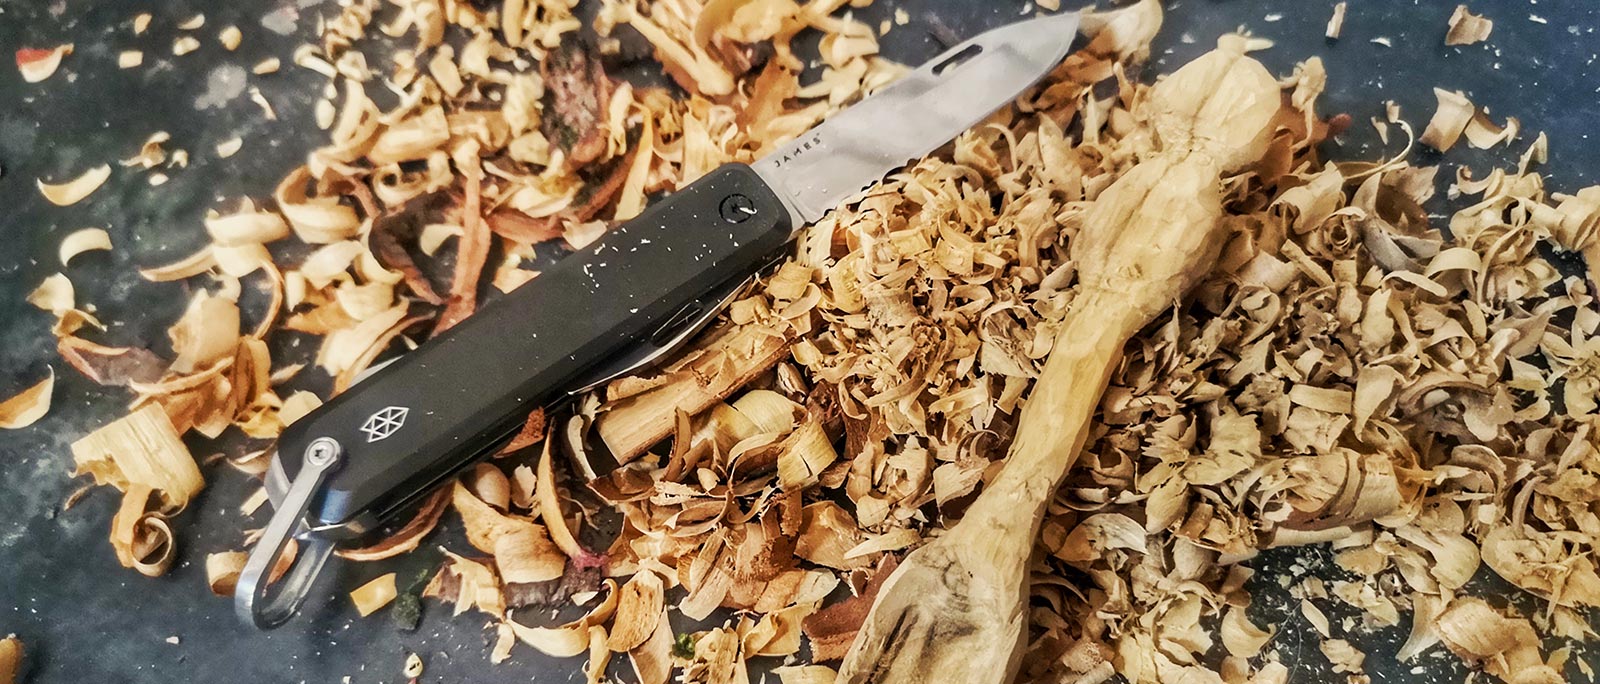 Simple Spoon Carving | WildBounds